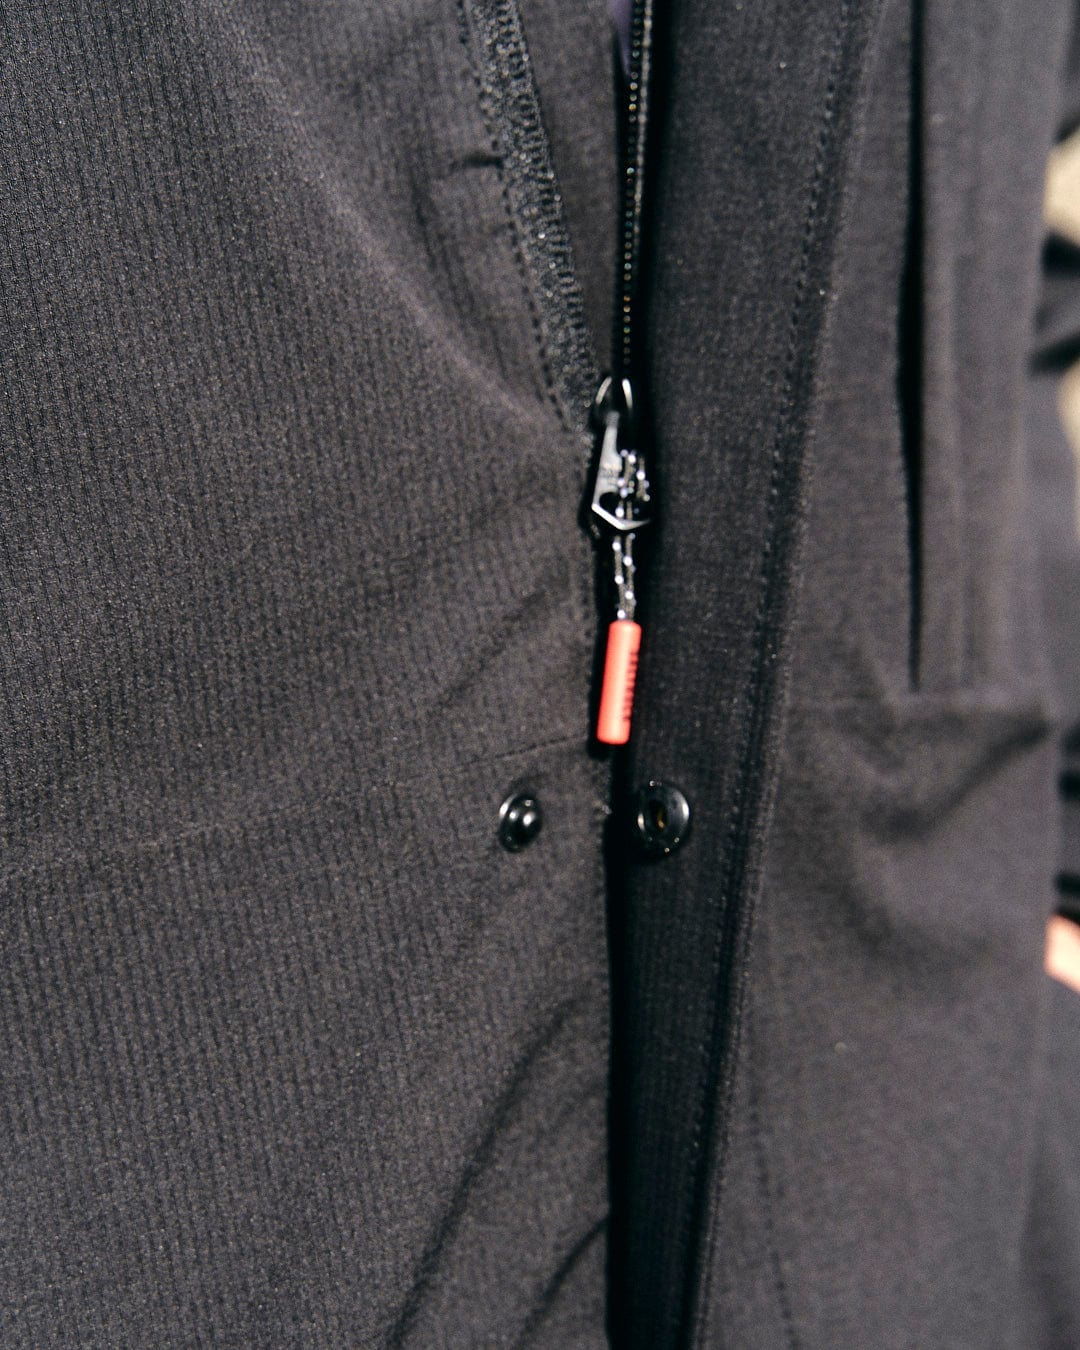 A close up of a Saltrock Whistler - Mens Hooded Jacket - Black with a zipper and waterproof feature.